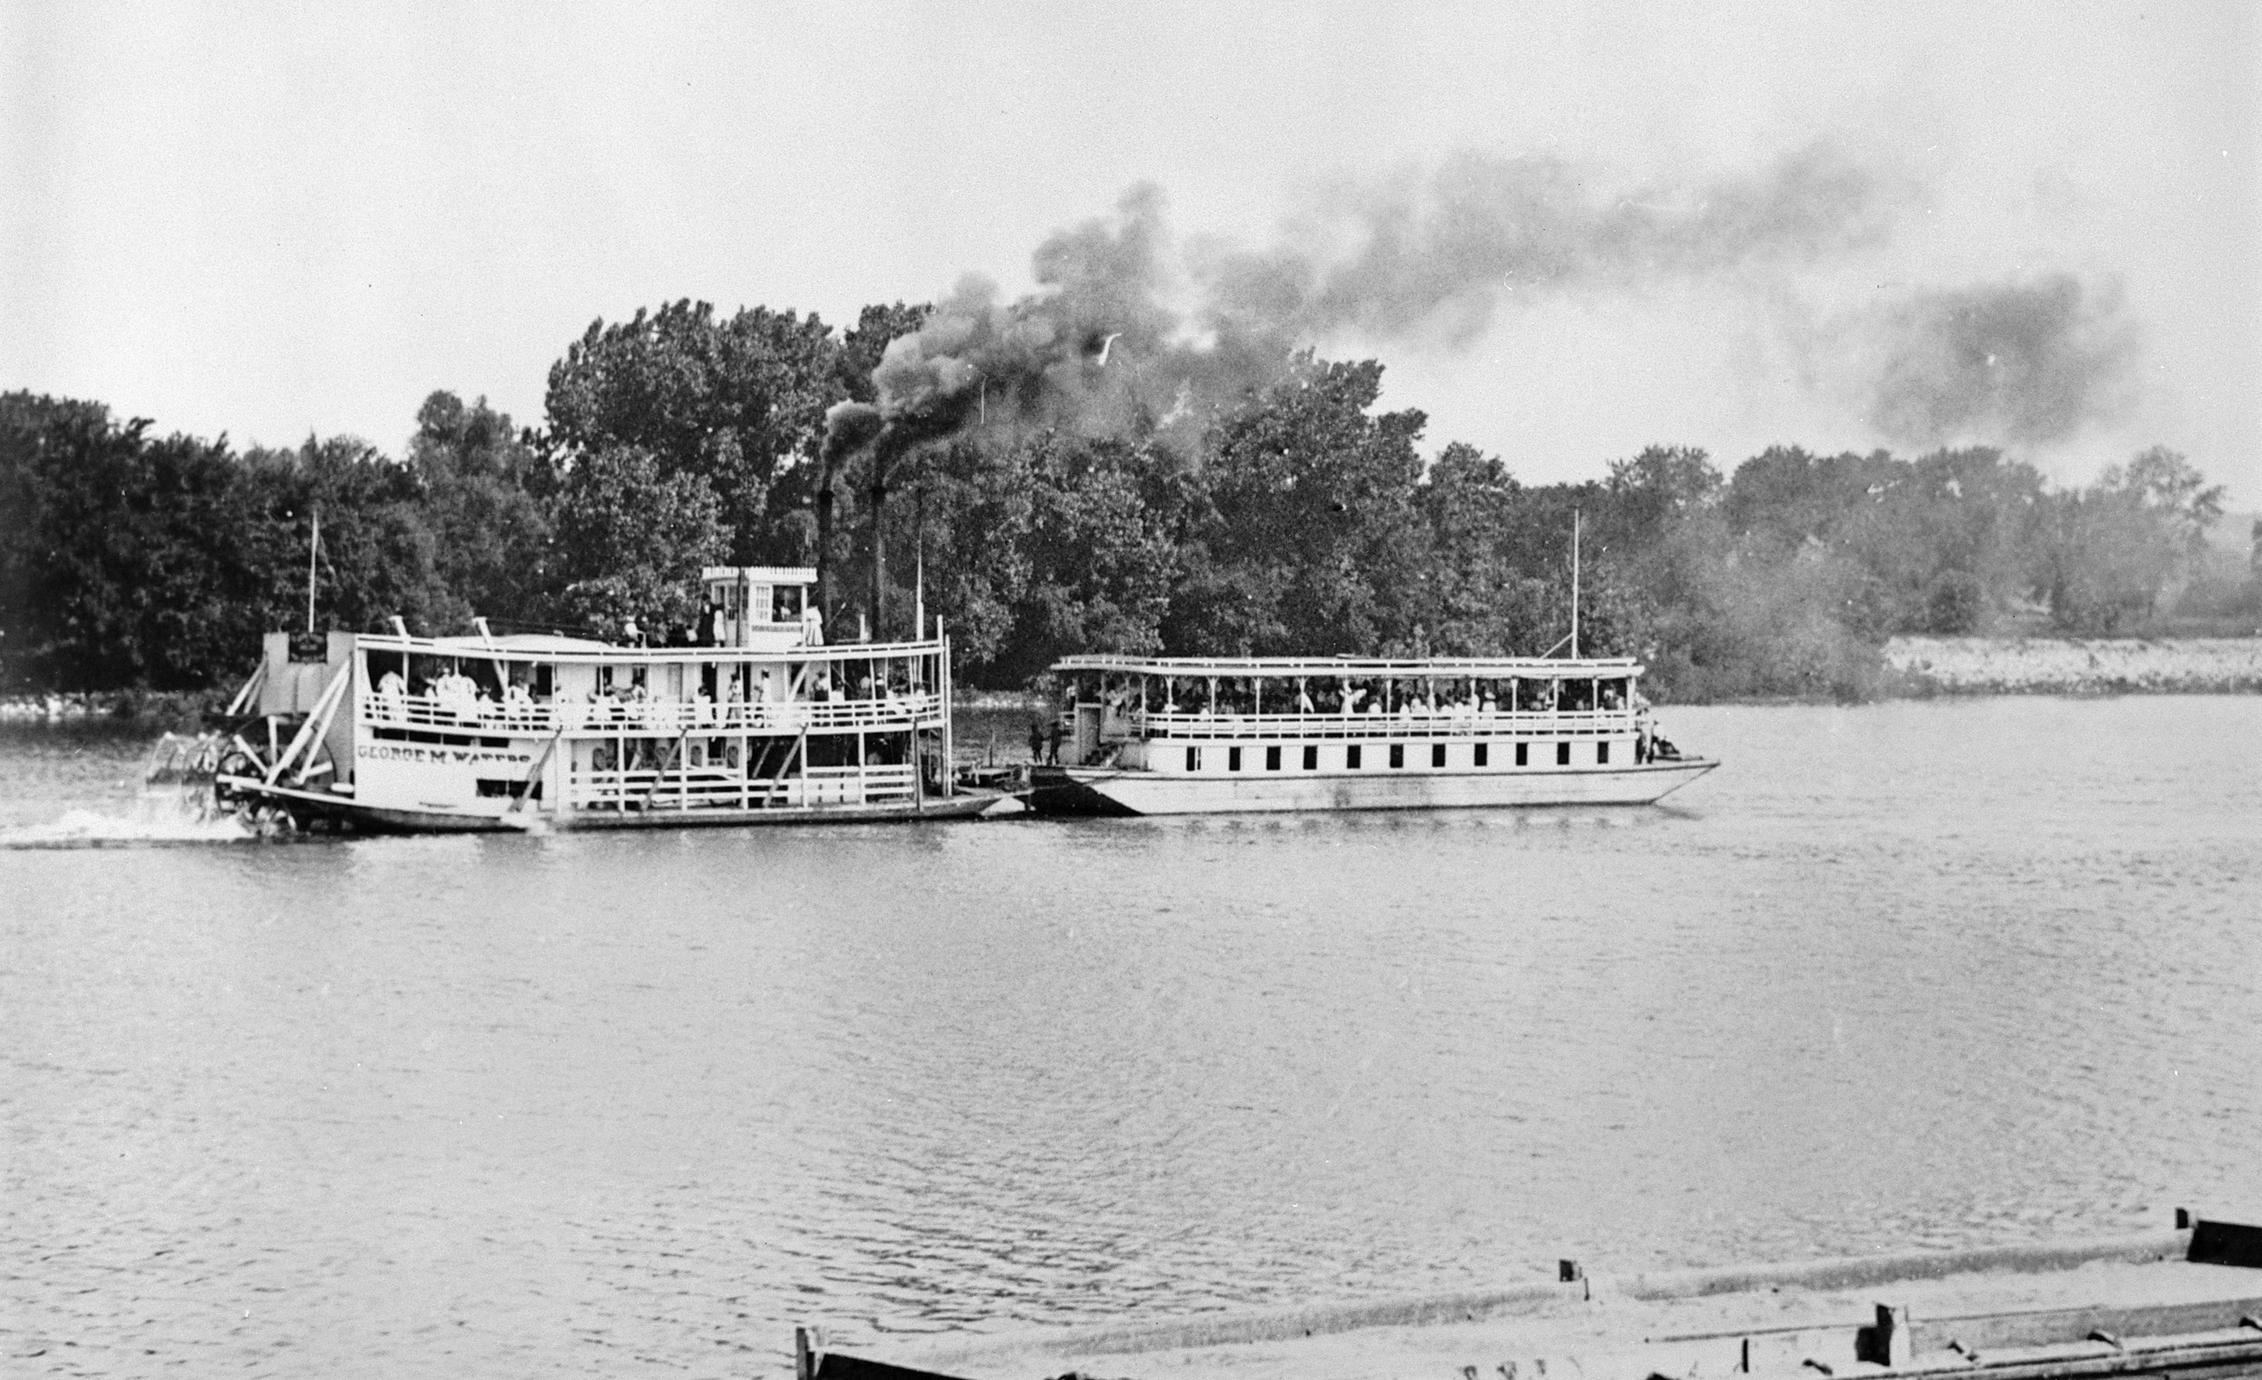 George M. Waters (Towboat, 1895-1901?)